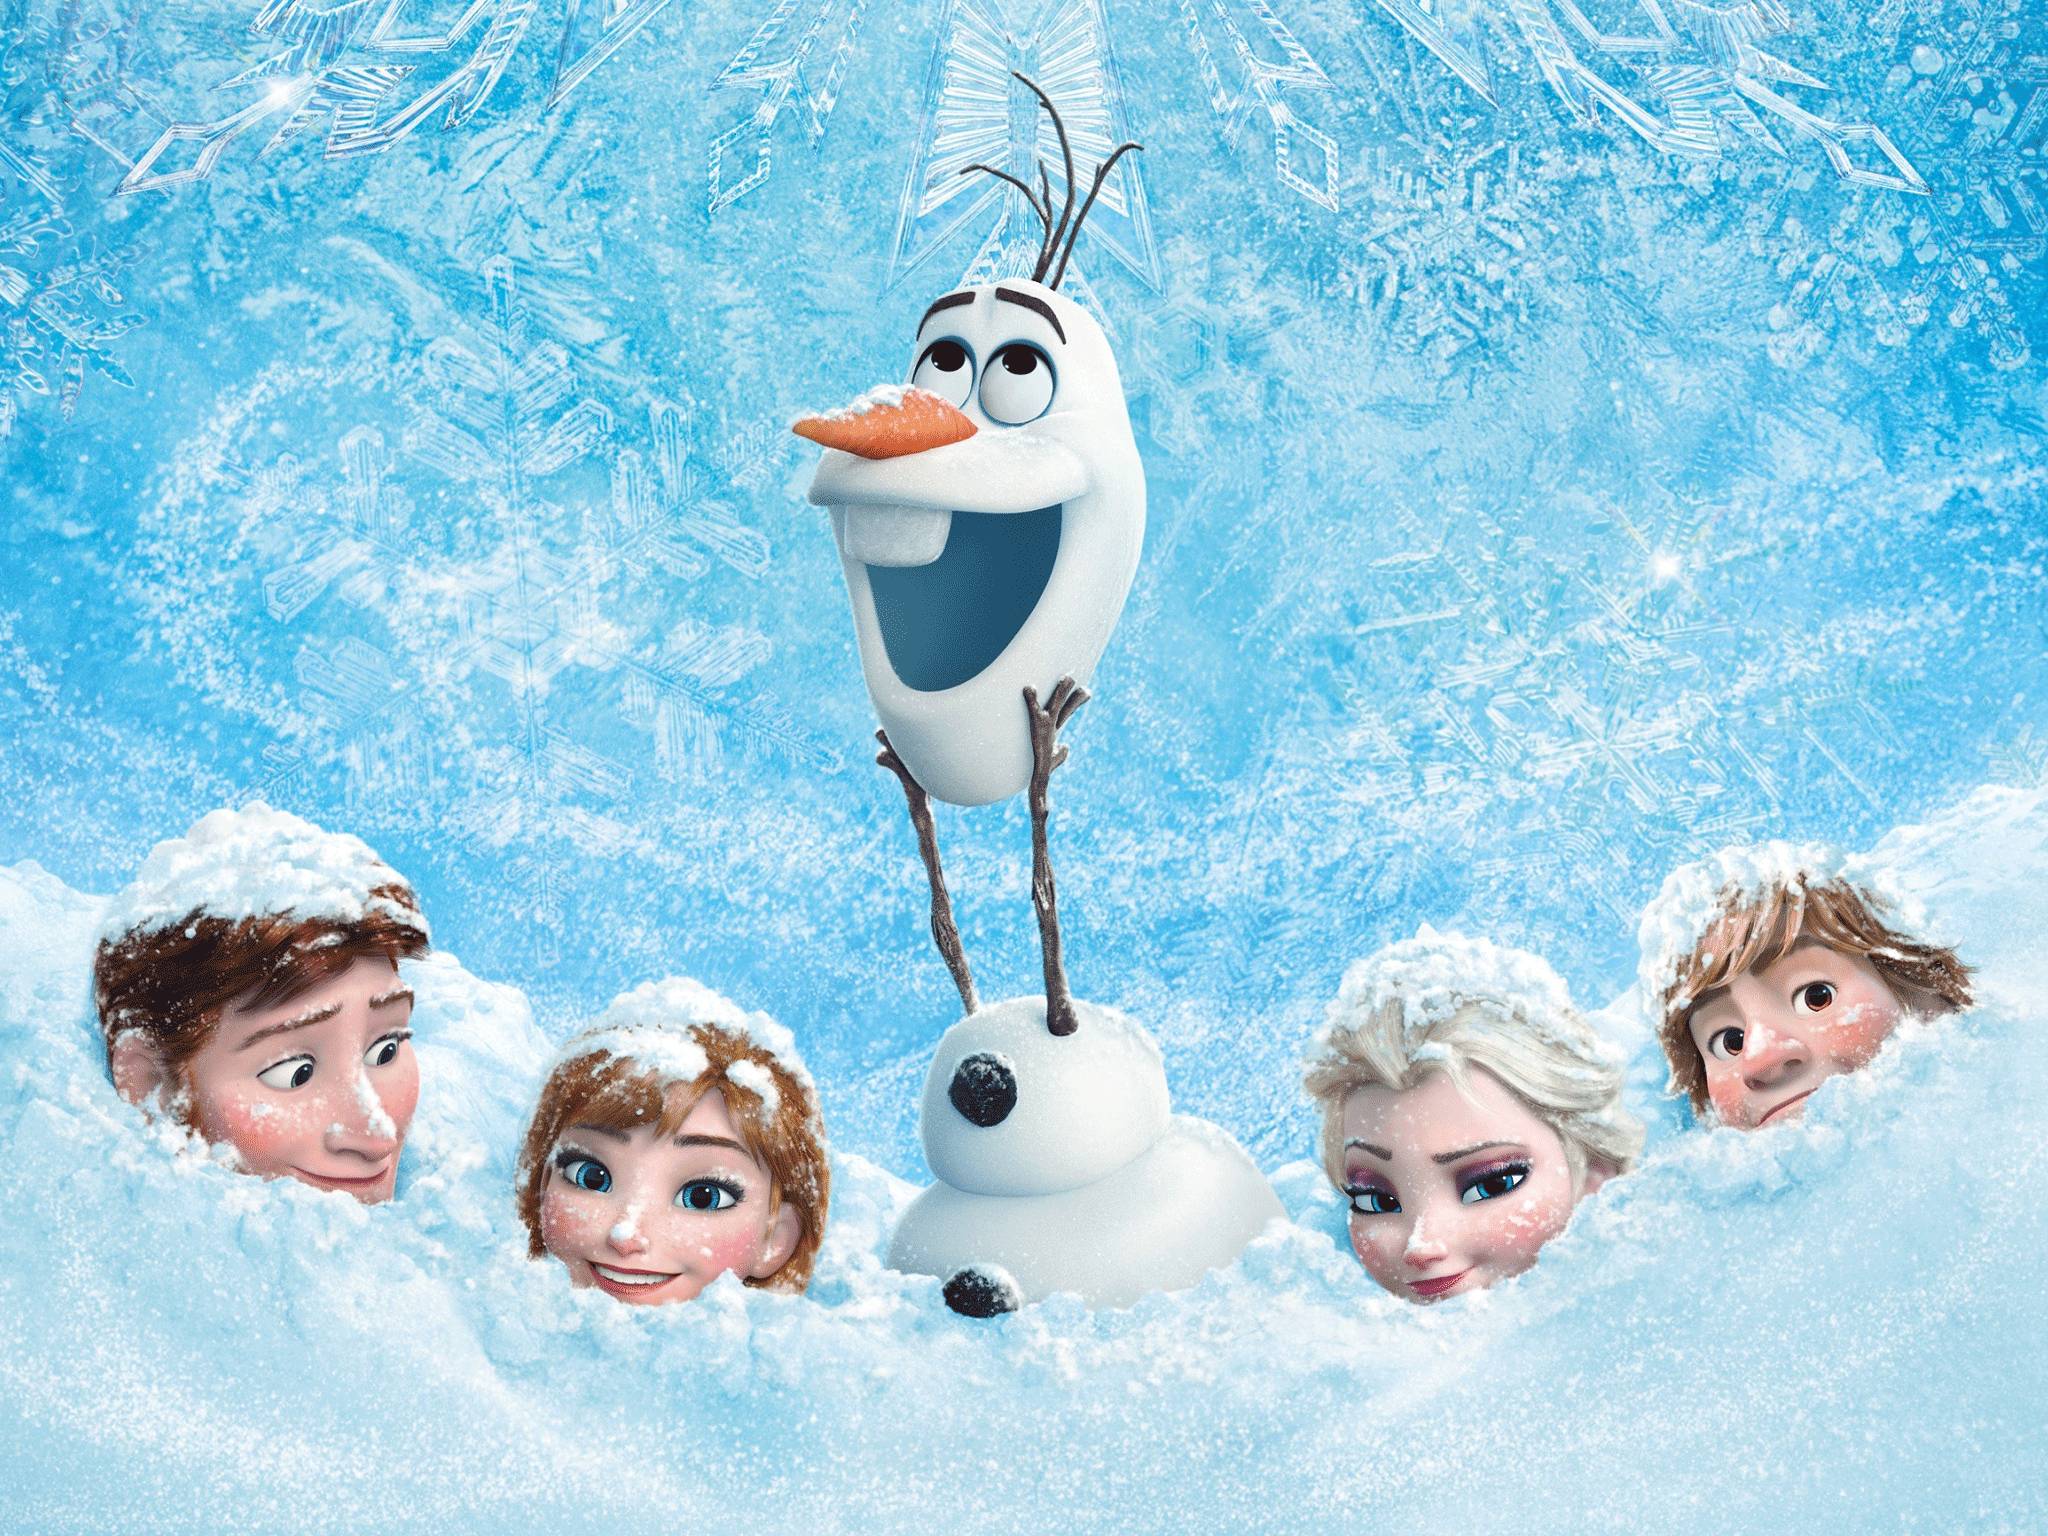 The Frozen soundtrack has spent nine weeks at number one in the US album chart